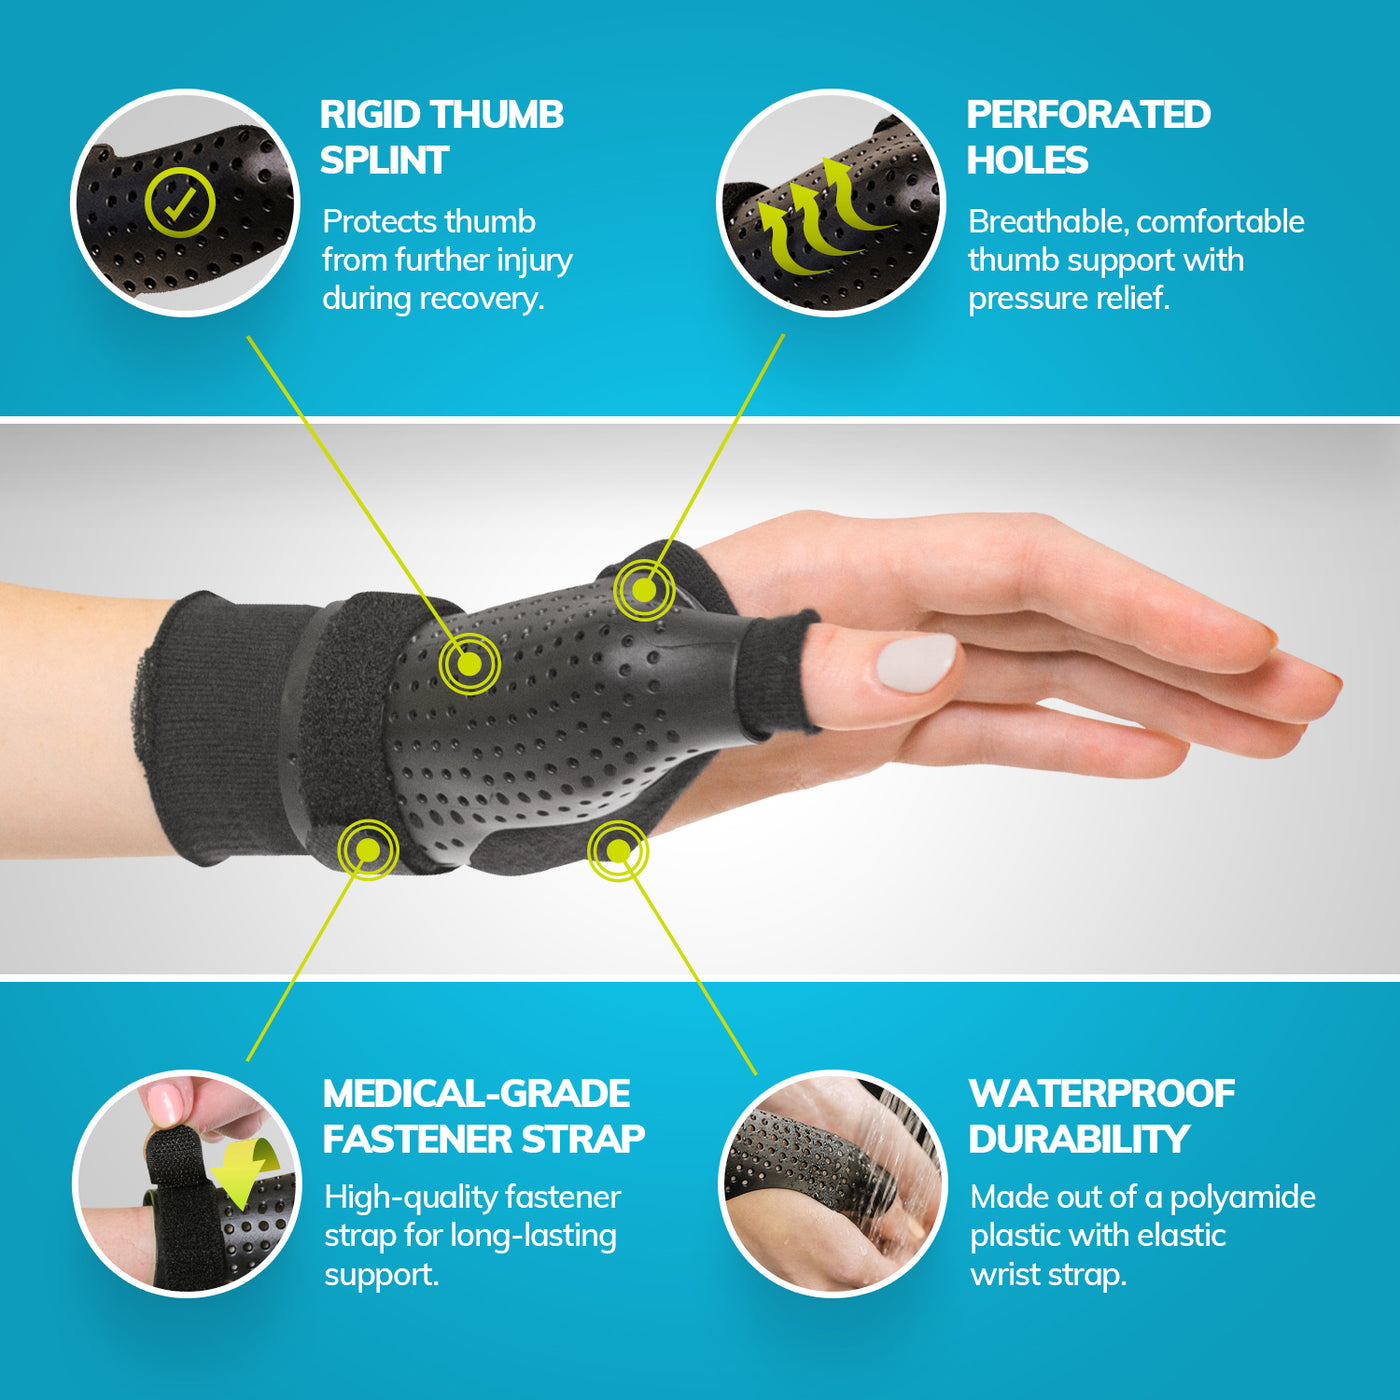 Protect and Play: Wholesale sports finger protector 